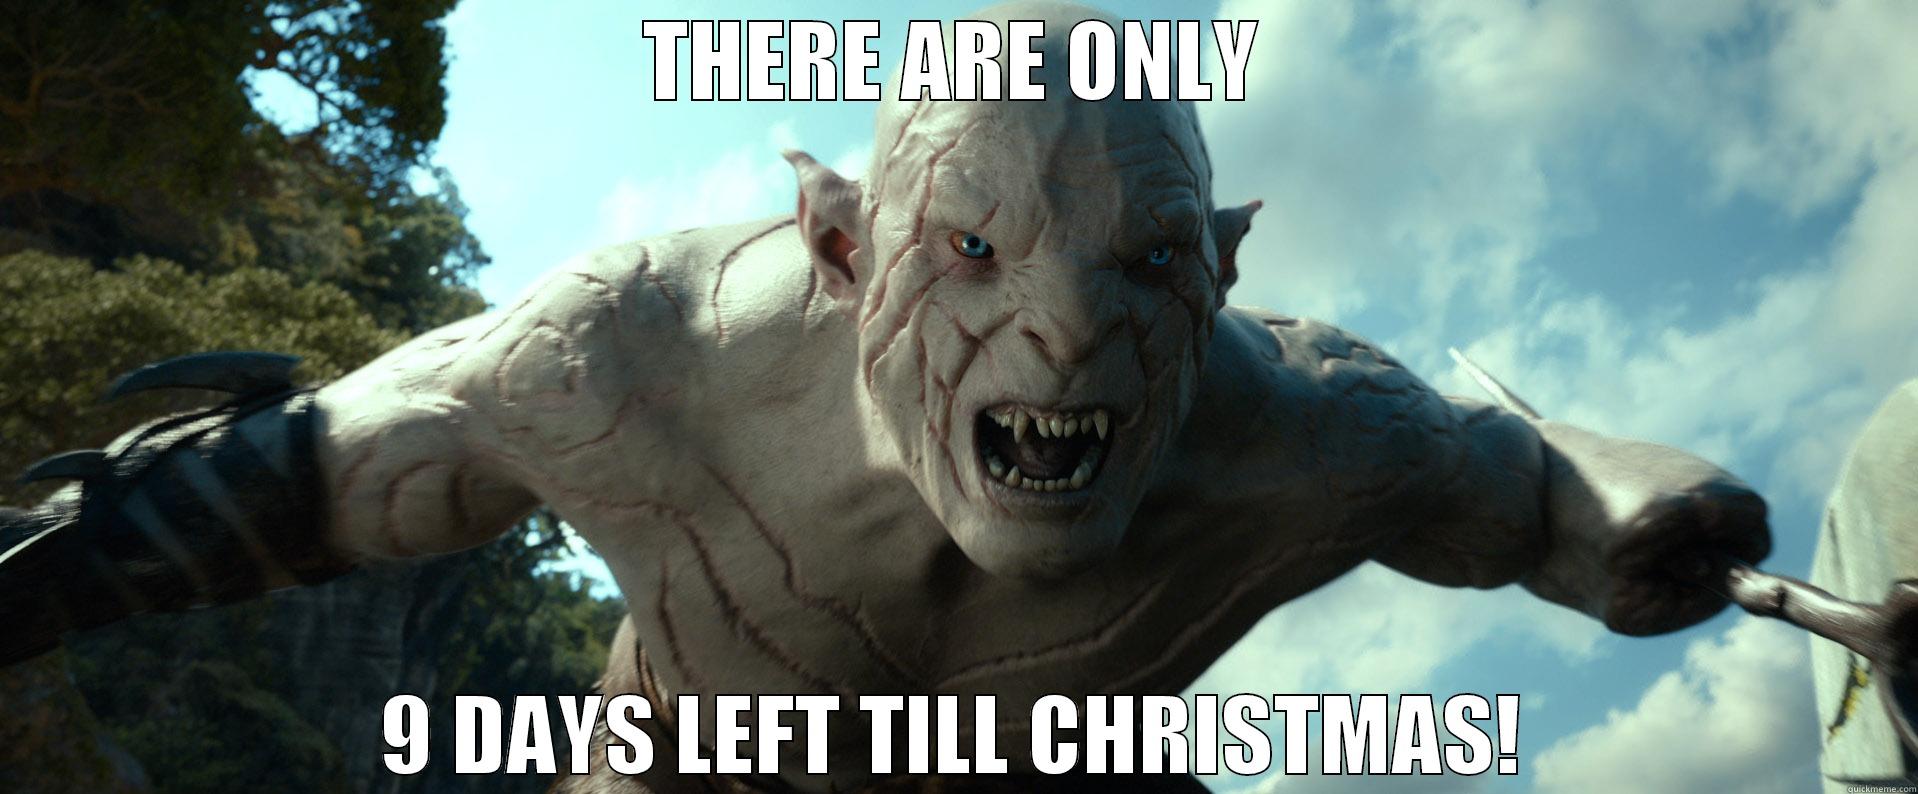 Hobbit Xmas - THERE ARE ONLY 9 DAYS LEFT TILL CHRISTMAS! Misc